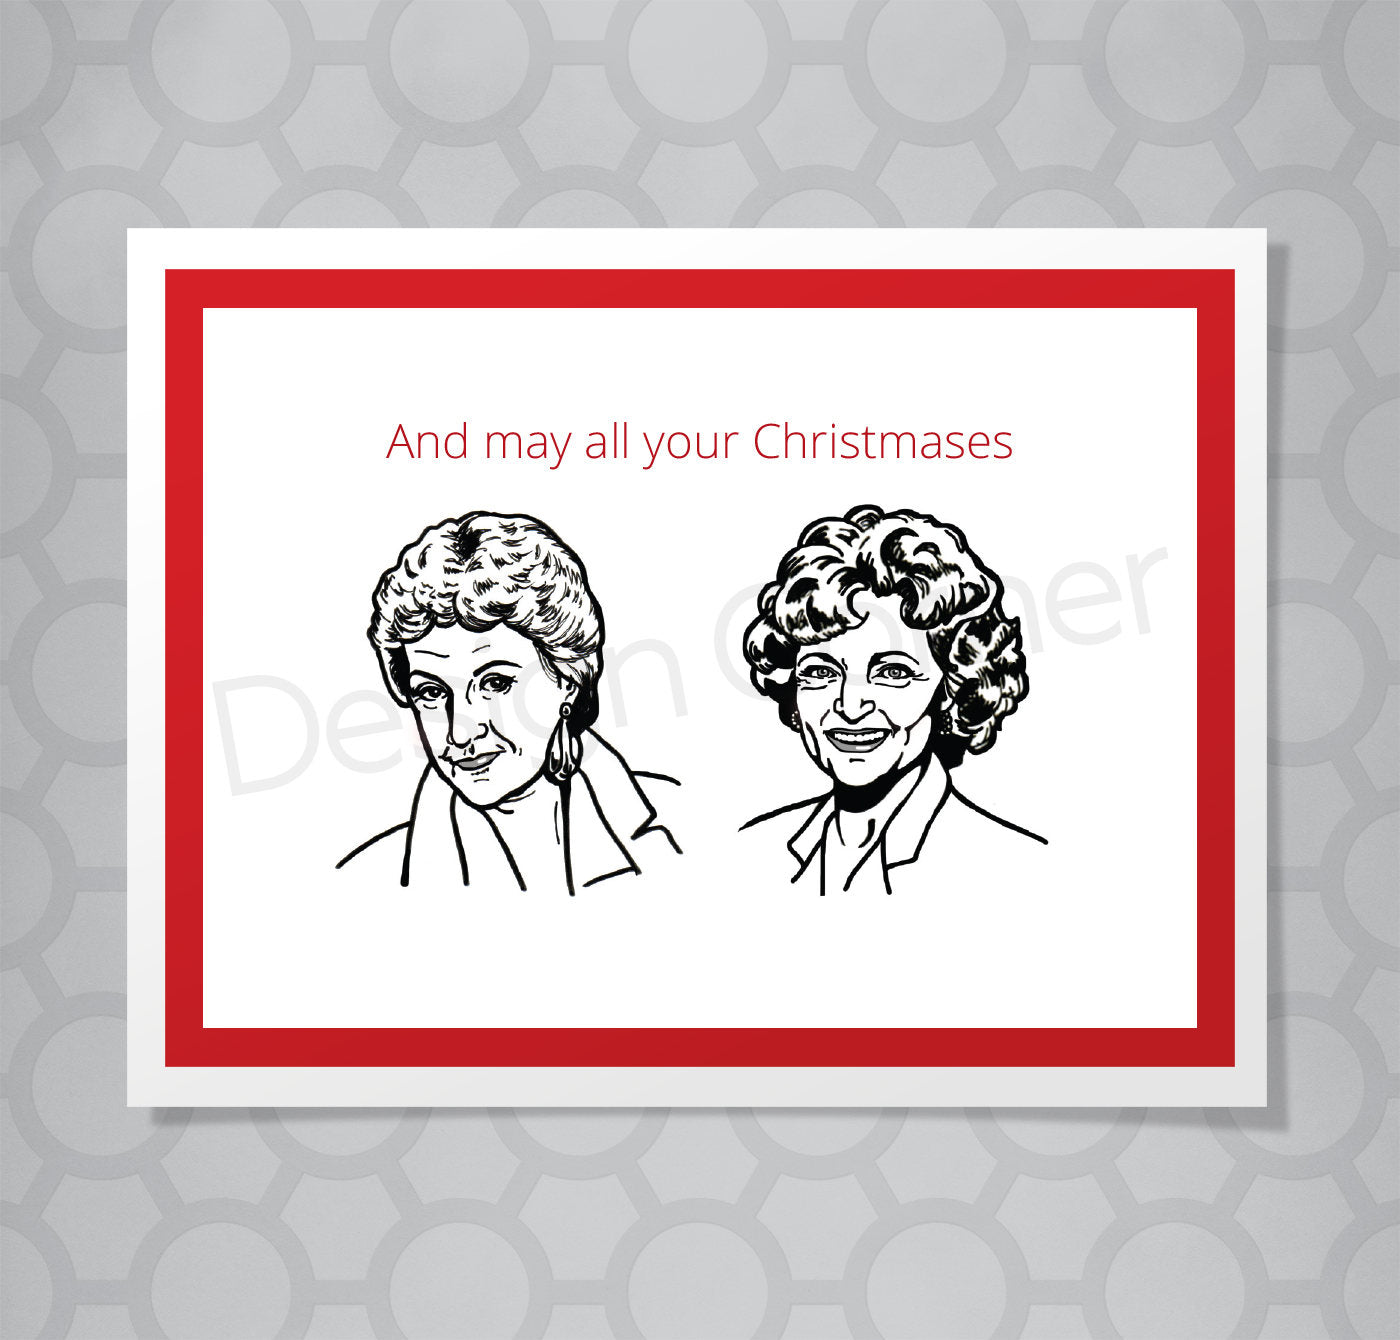 Illustration of Golden Girls Dorothy and Rose on a Christmas card with caption "And my all your Christmases... (Bea White)"